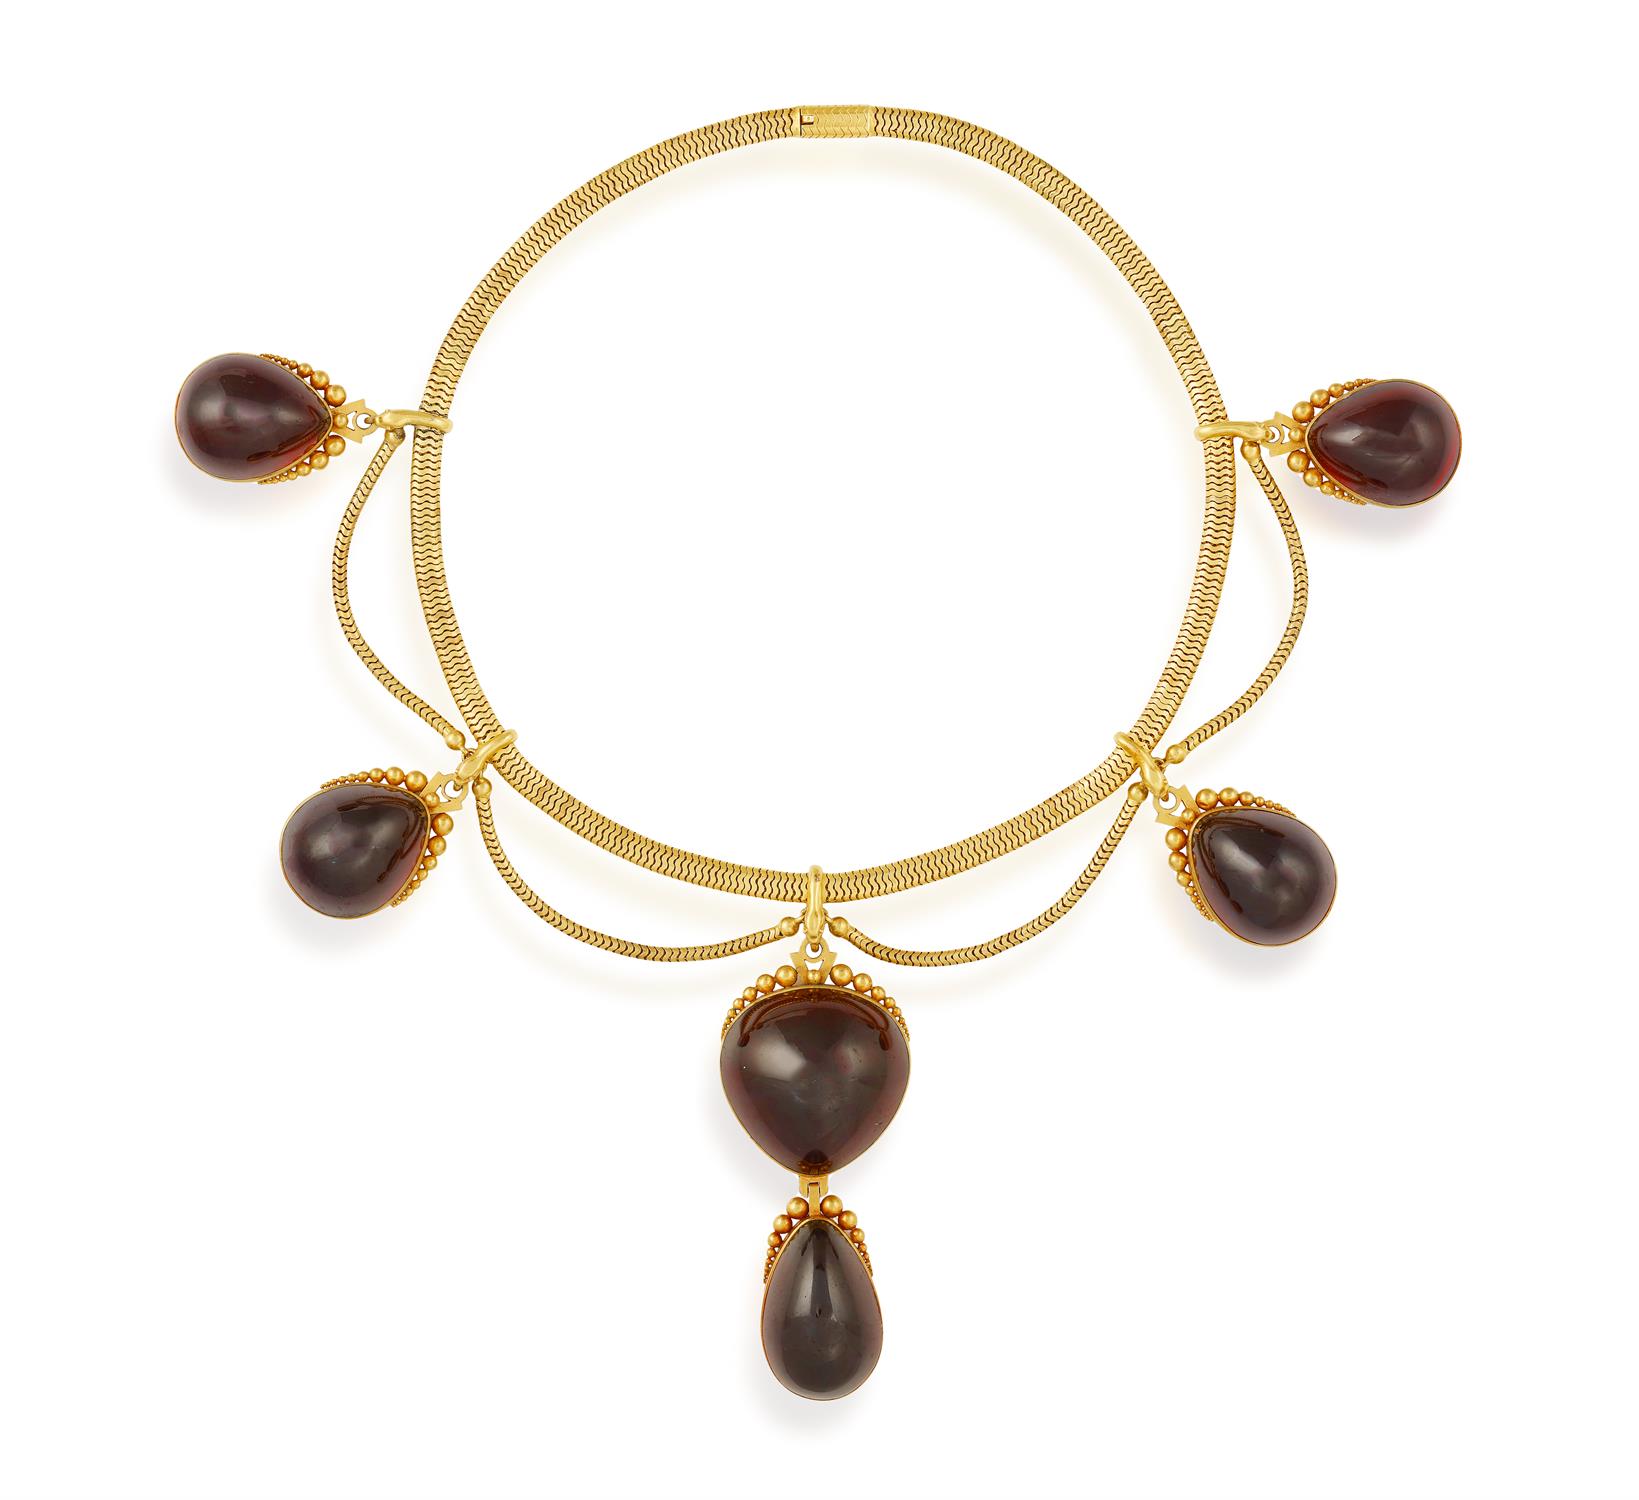 A MID-19TH CENTURY GARNET NECKLACE, CIRCA 1850 Of swag design, the snake-link chain suspending